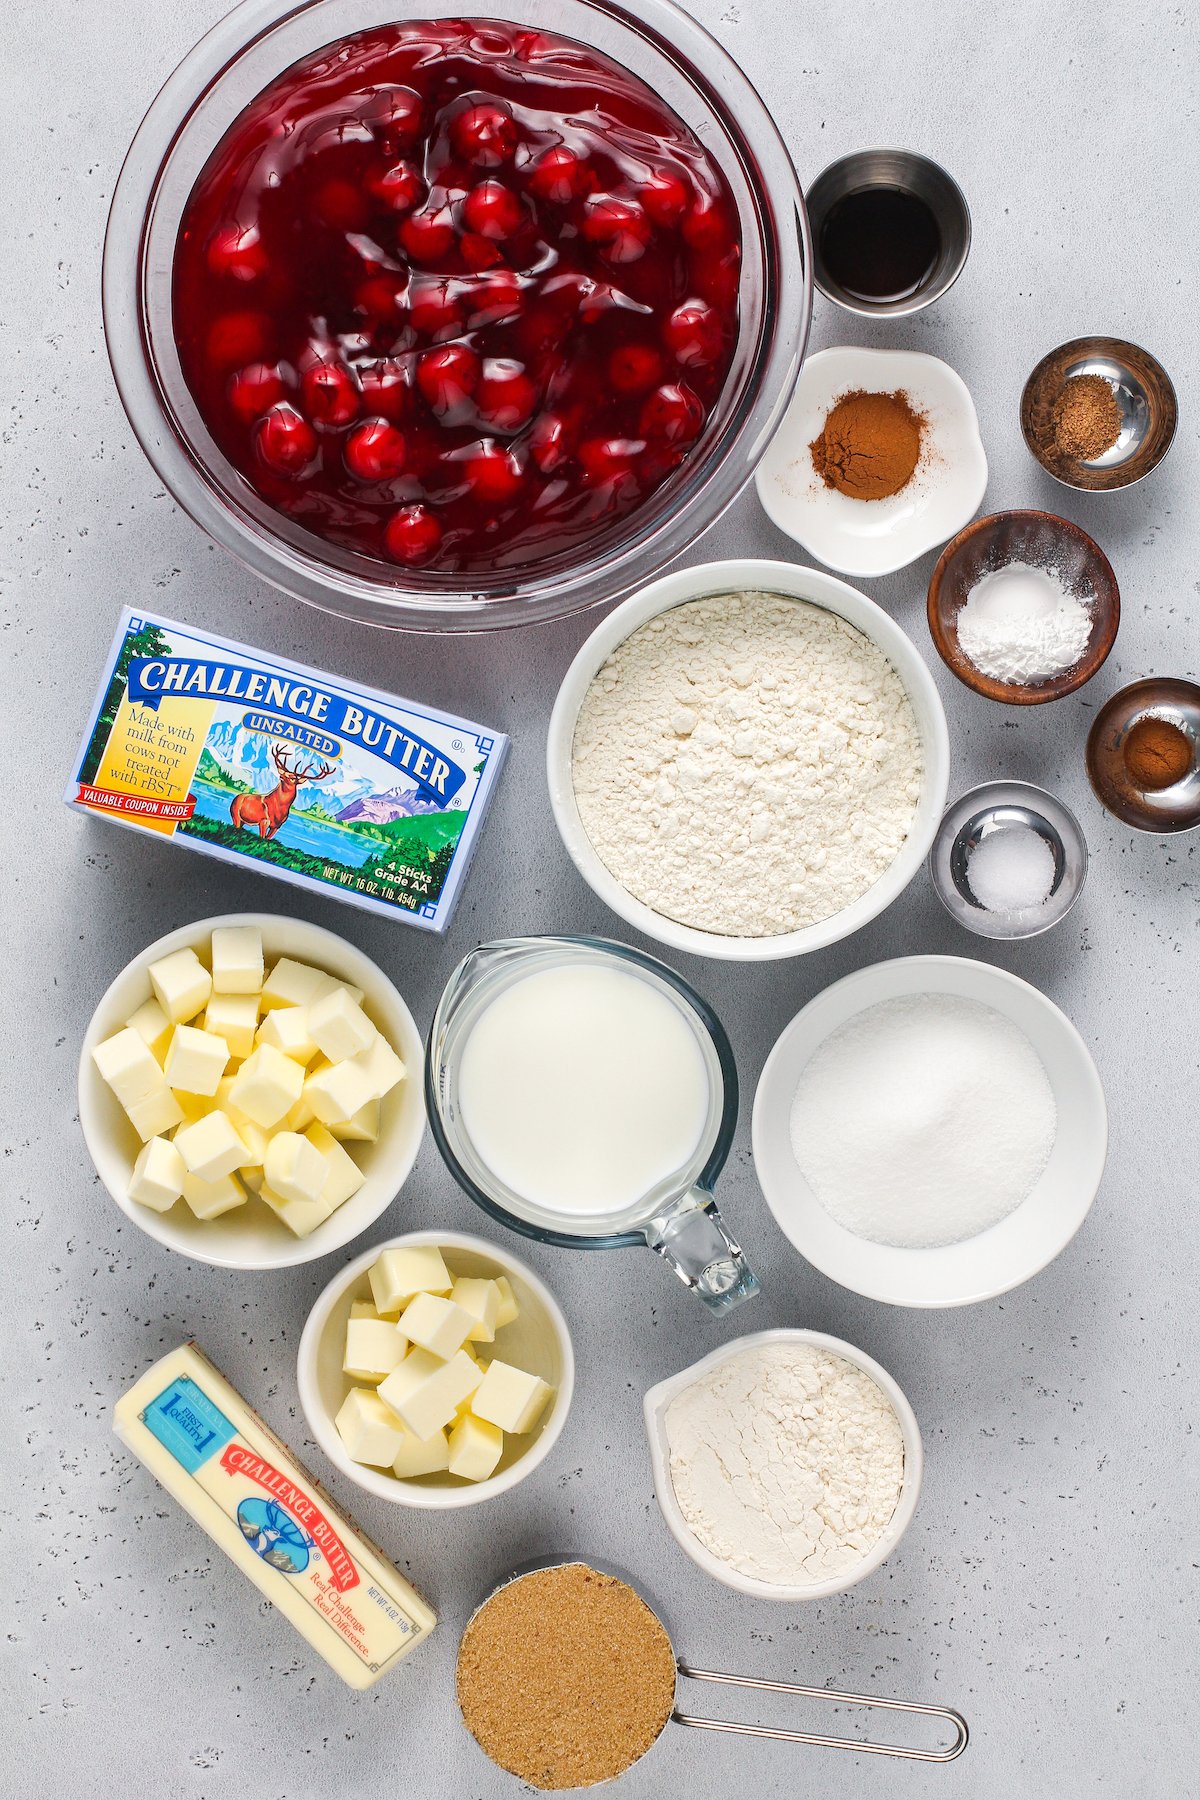 Ingredients for cherry cobbler in bowls.